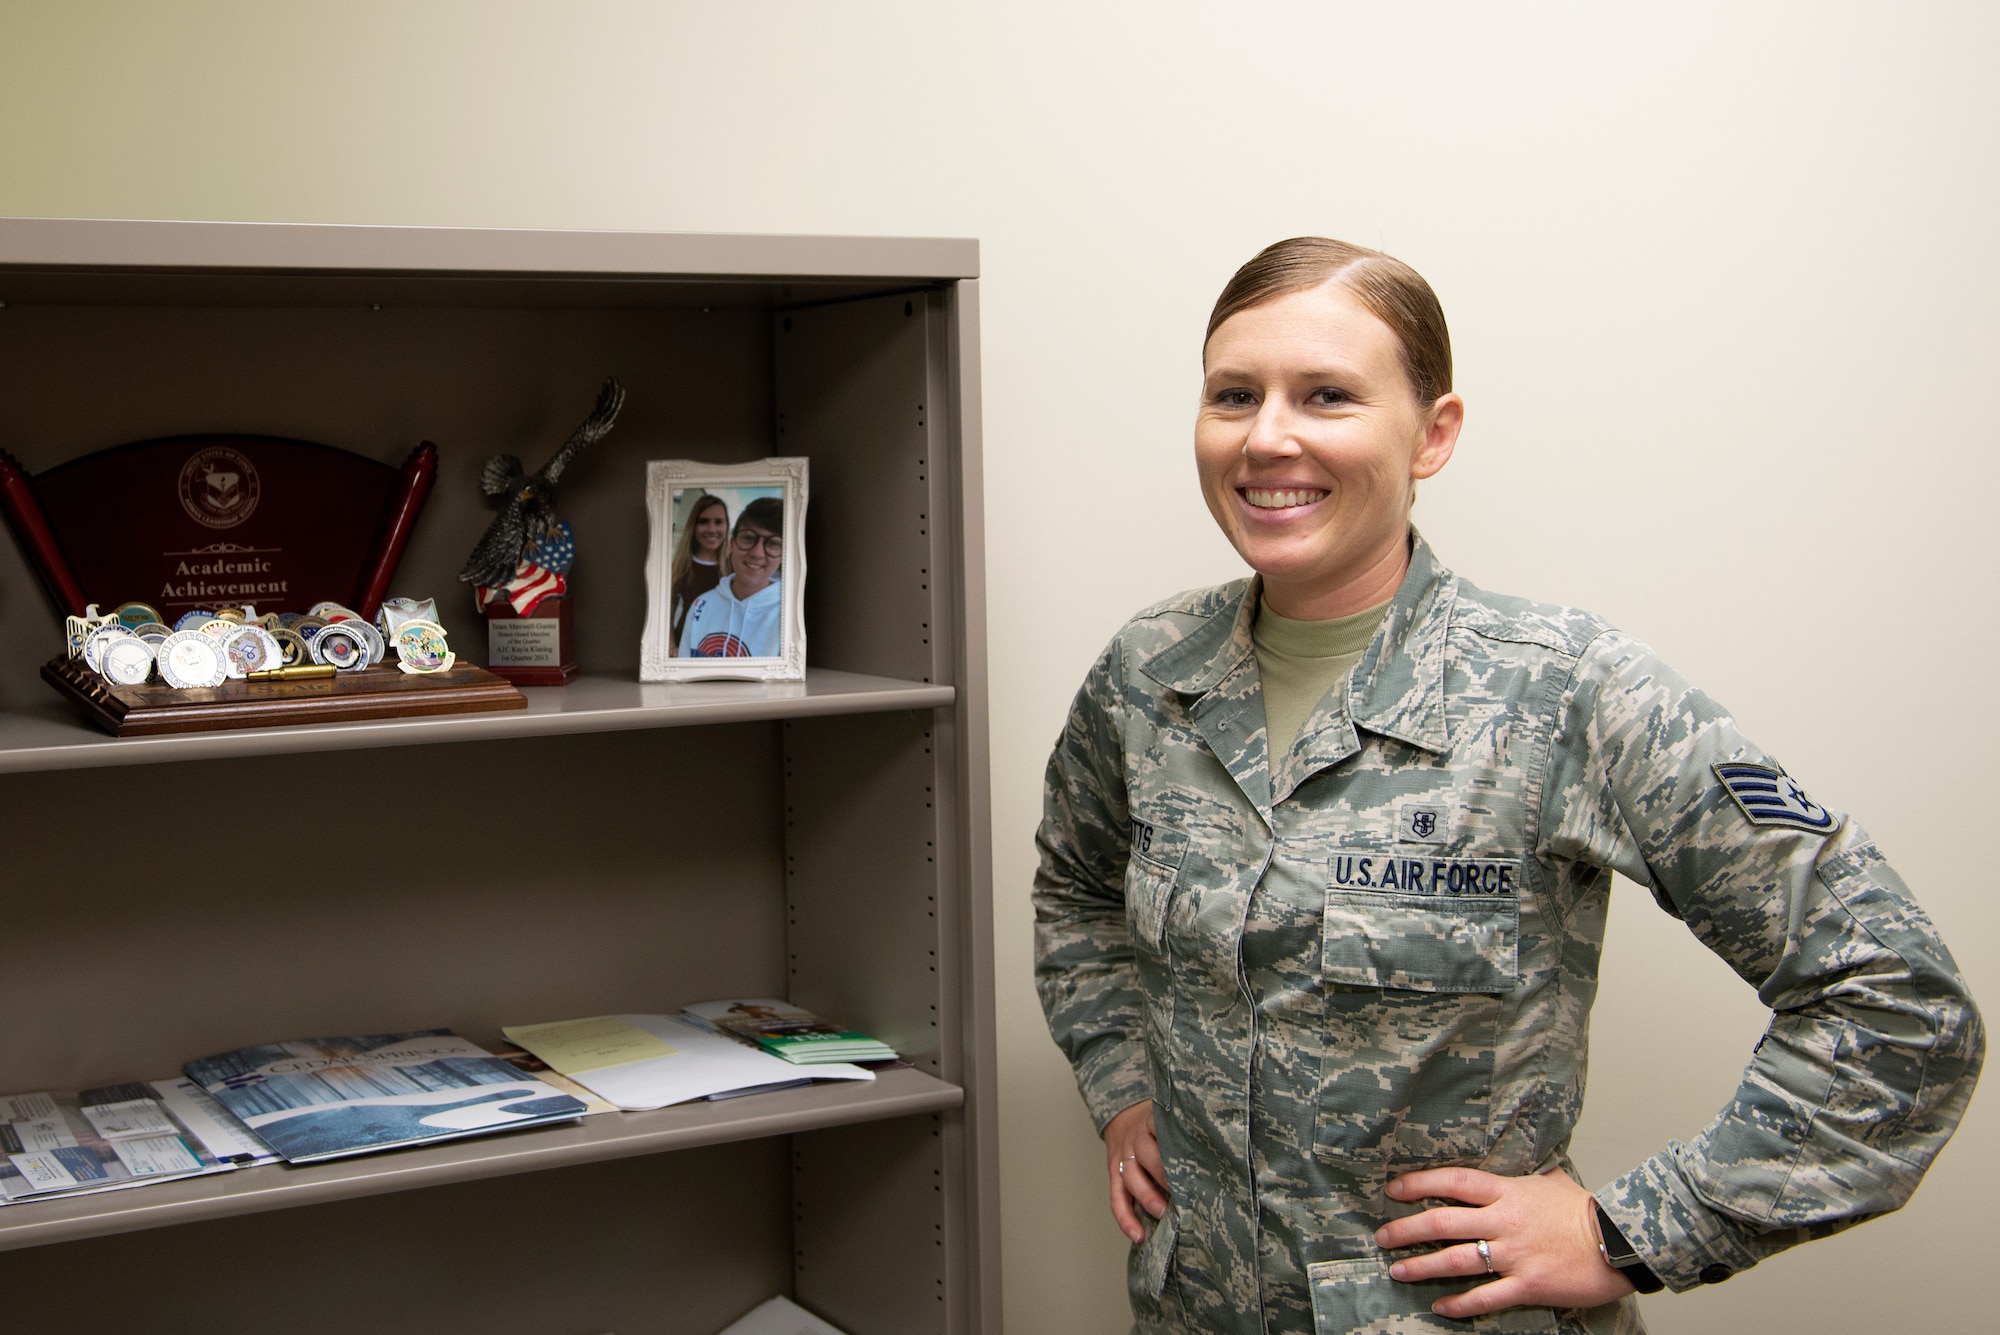 U.S. Air Force Staff Sgt. Kayla Betts, 81st Aerospace Medicine Squadron mental health technician, poses for a photo at the Keesler Medical Center on Keesler Air Force Base, Mississippi, June 27, 2019. Betts uses her experiences as a member of the LGBT community in addition to her mental health training to assist her patients. (U.S. Air Force photo by Airman 1st Class Kimberly L. Mueller)